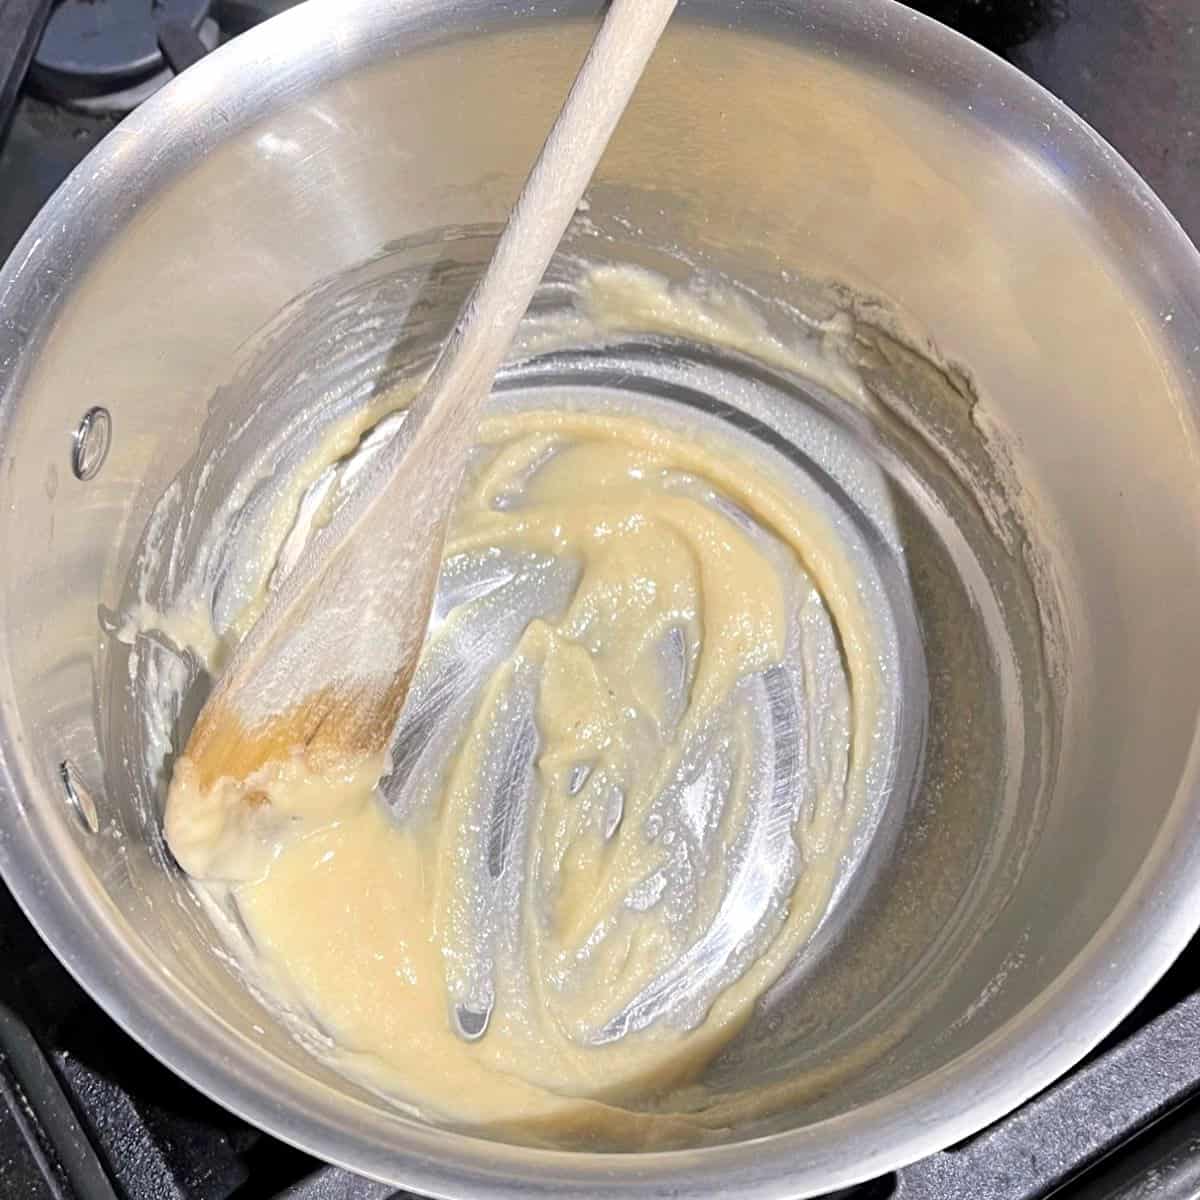 Roux cooked in saucepan.